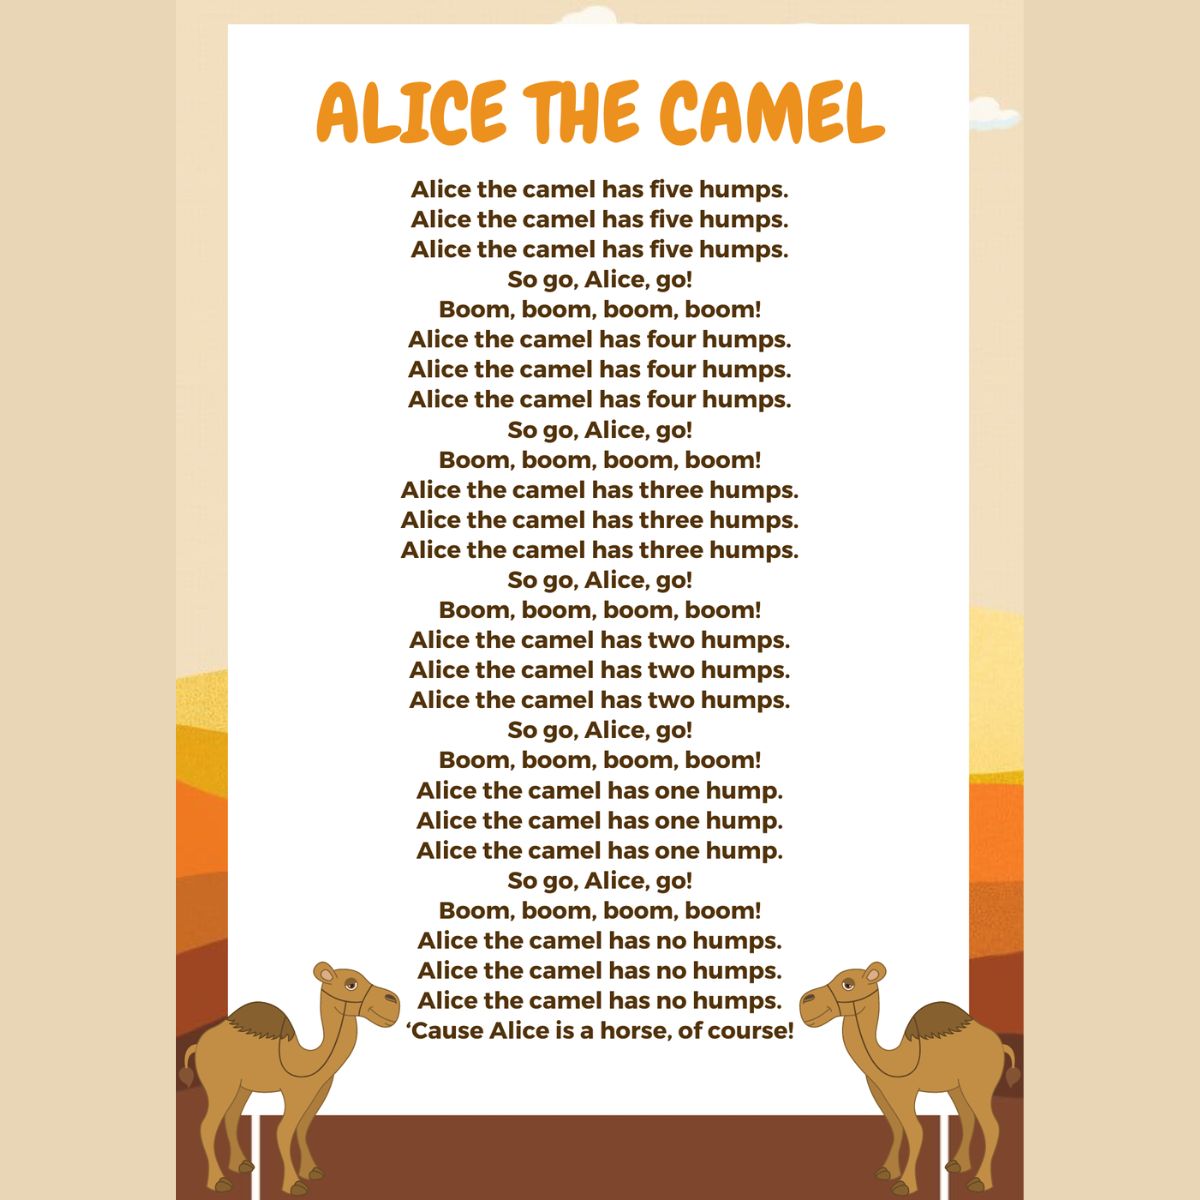 Alice The Camel lyrics with Camels on background